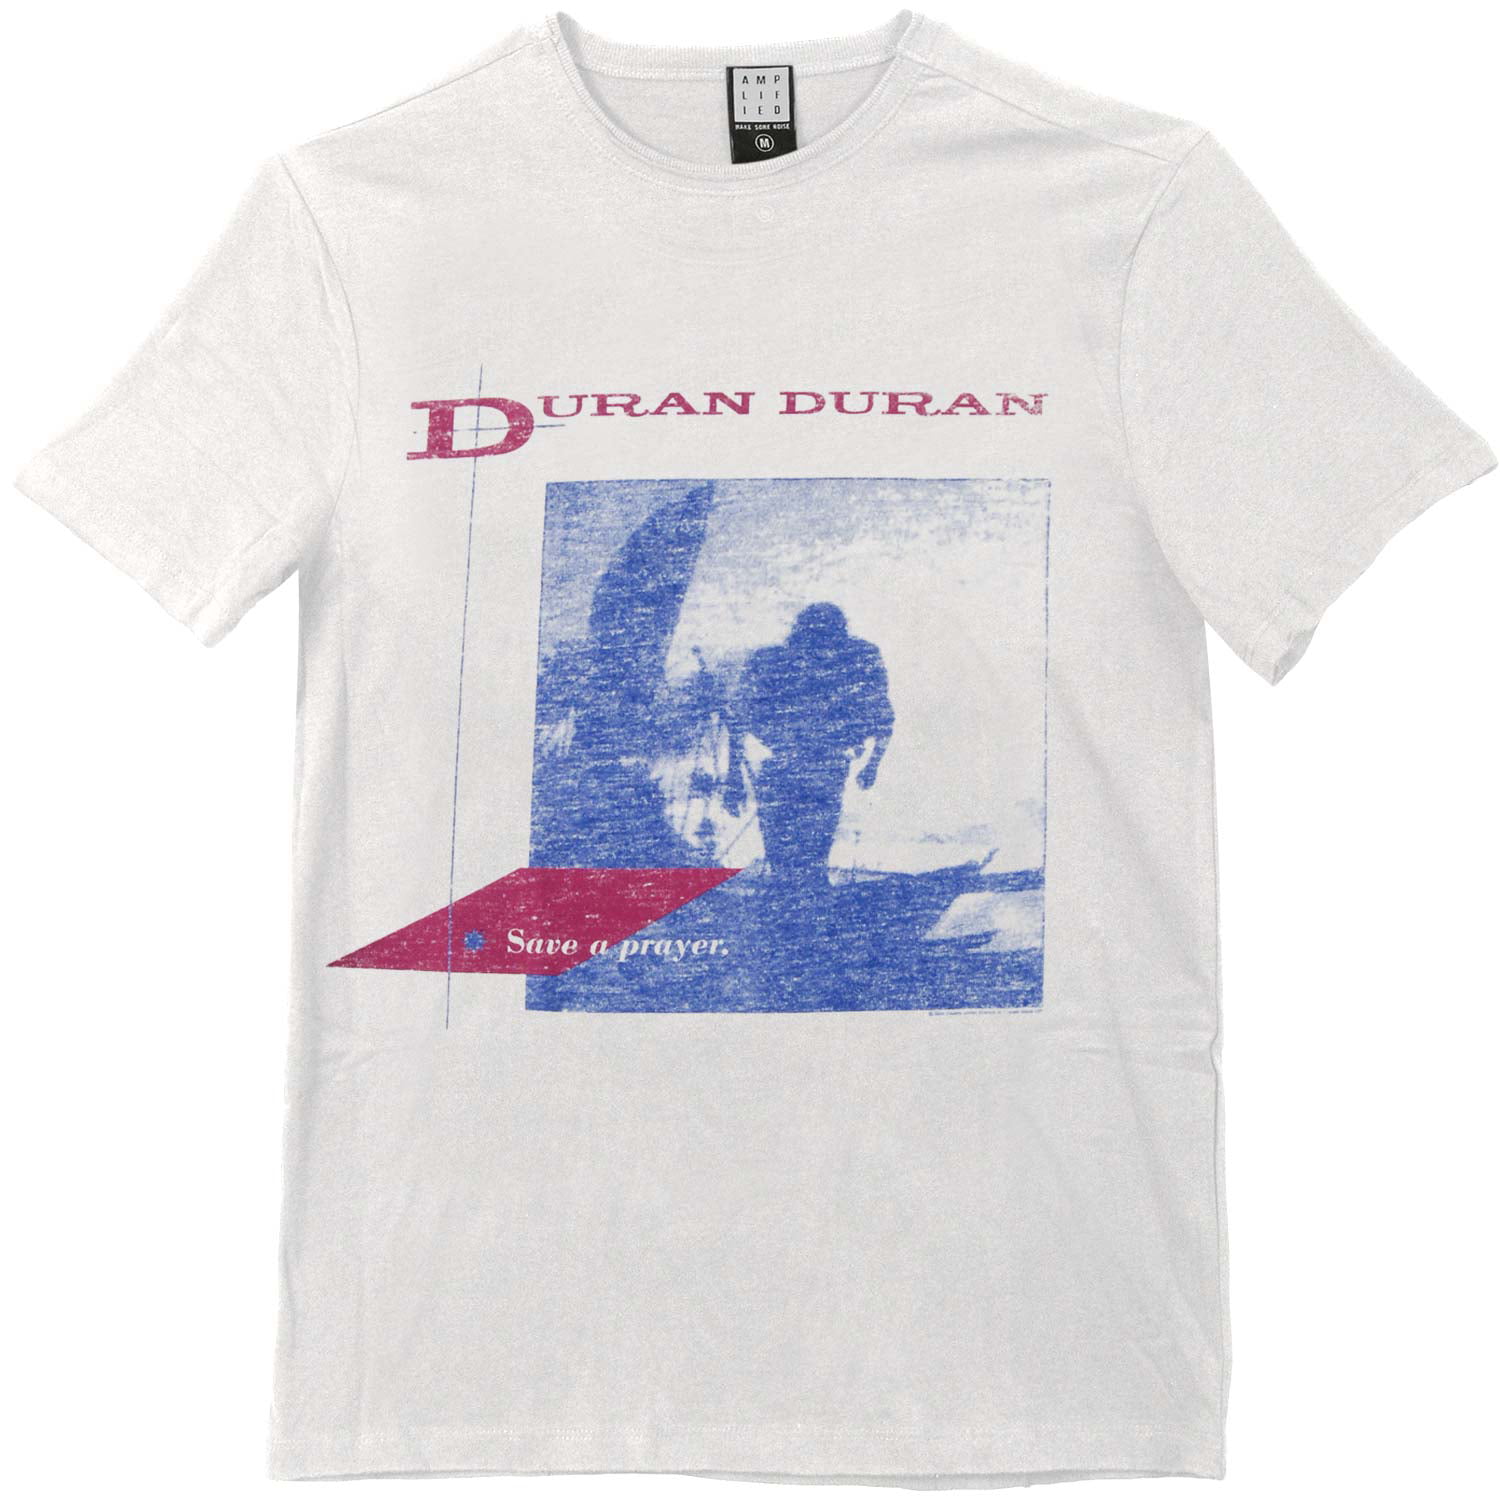 Men's White T-Shirt Size S to 5XL live New Duran Duran As The Lights Go Down